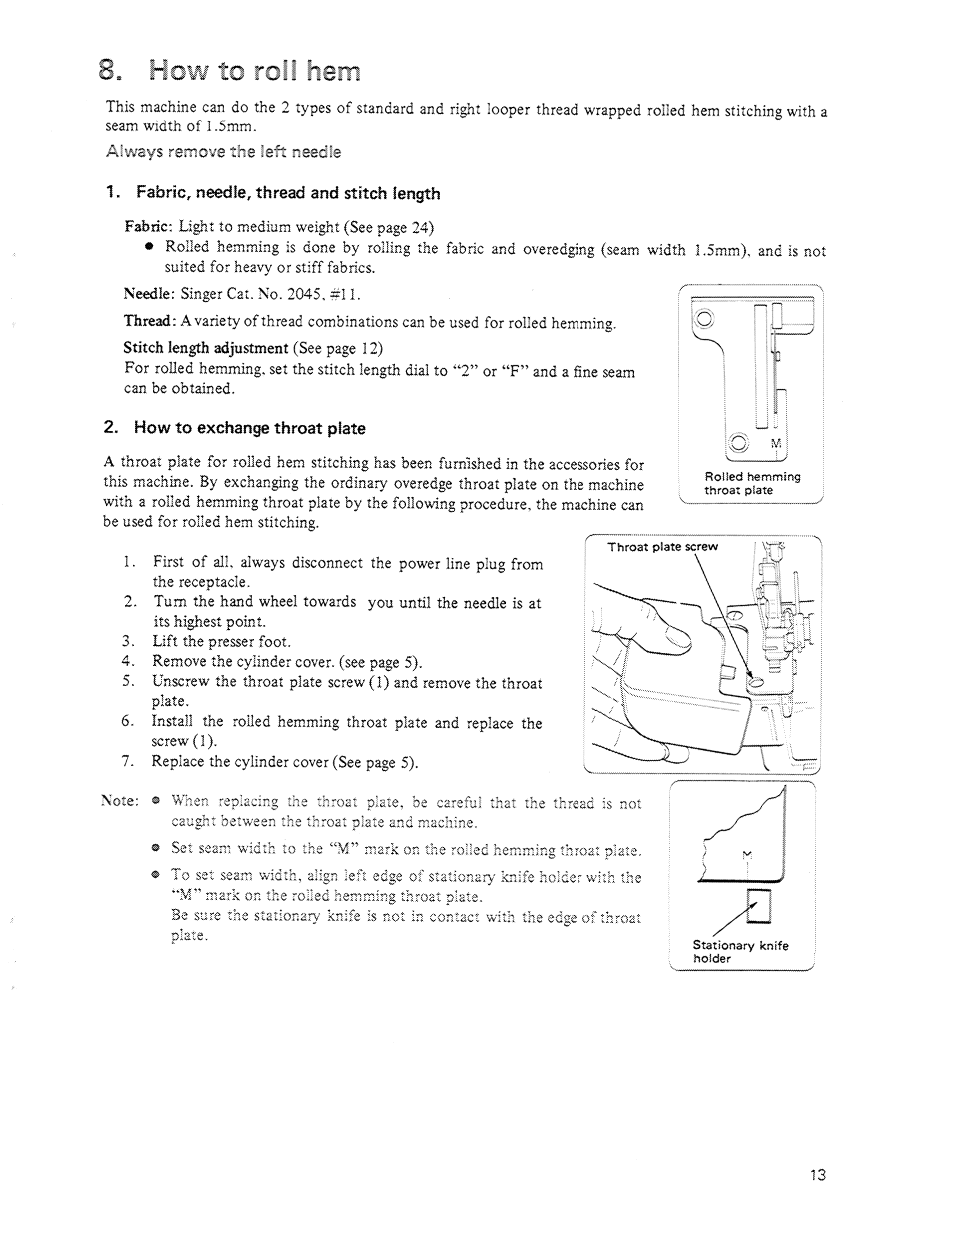 Fabric, needle, thread and stitch length, How to exchange throat plate, Always remove the left needle | SINGER 14U64A User Manual | Page 15 / 28